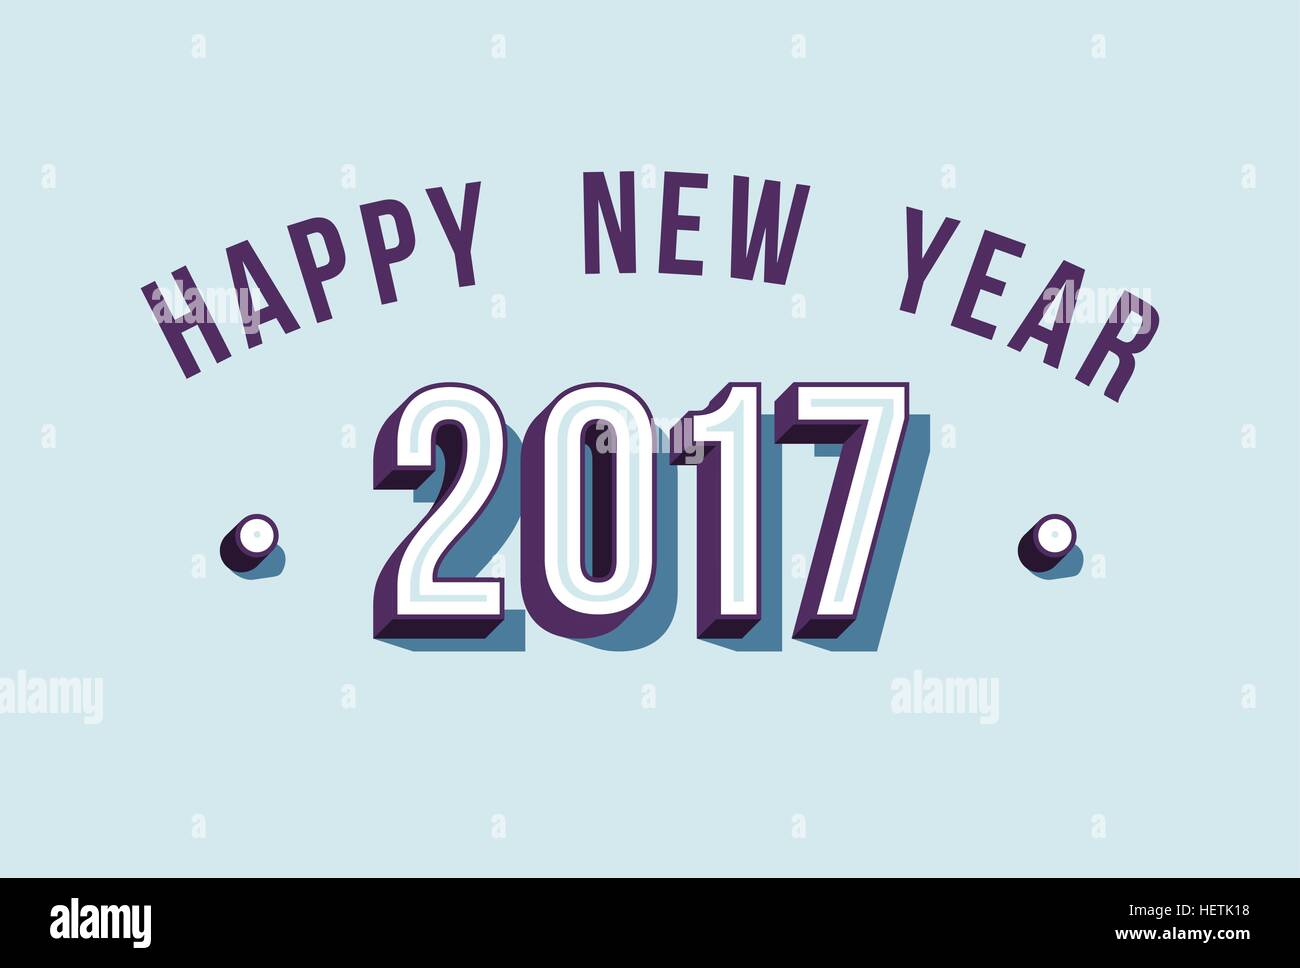 Happy New Year 2017 design, vintage style isometric typography for holiday season. EPS10 vector. Stock Vector